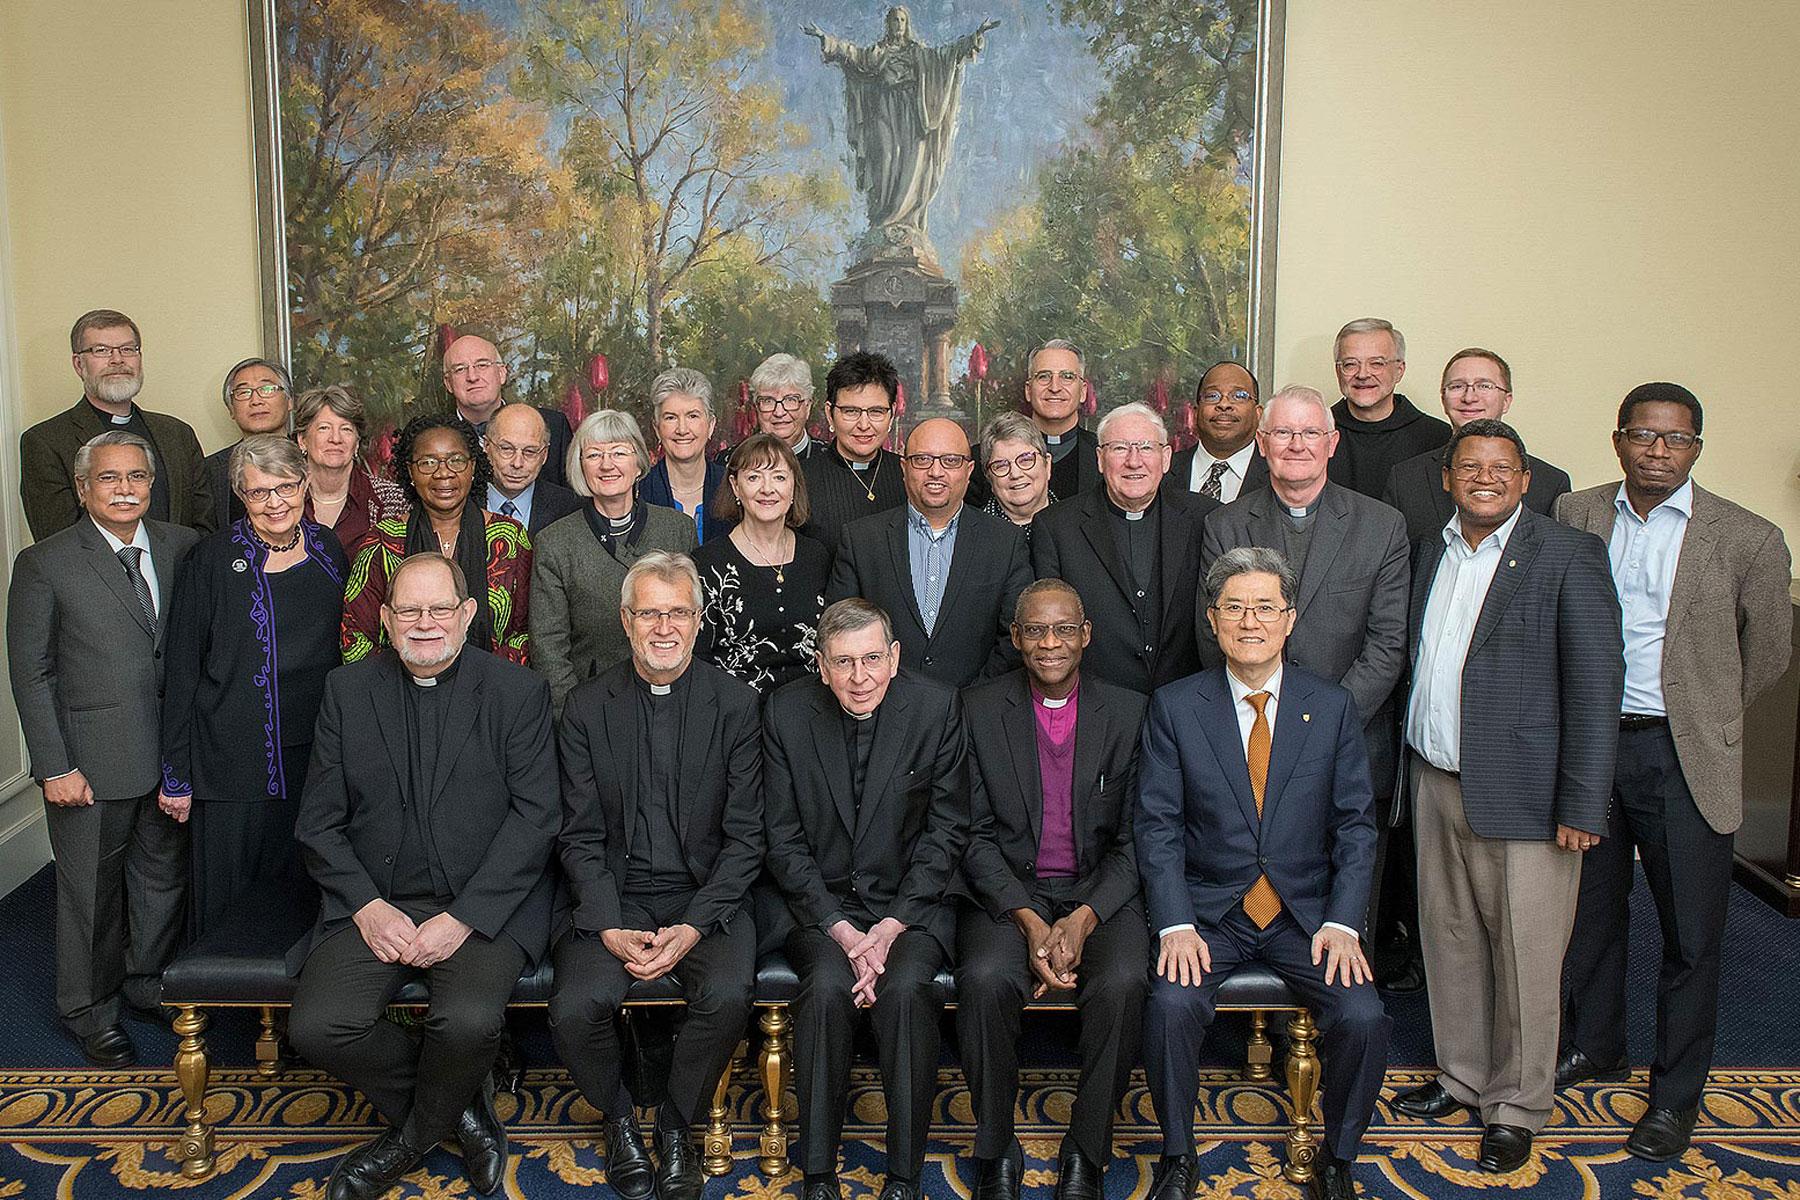 The representatives of five Christian World Communions --Anglicans, Catholics, Lutherans, Methodists and the Reformed-- at the Notre Dame Consultation. Photo: Steve Toepp / University of Notre Dame